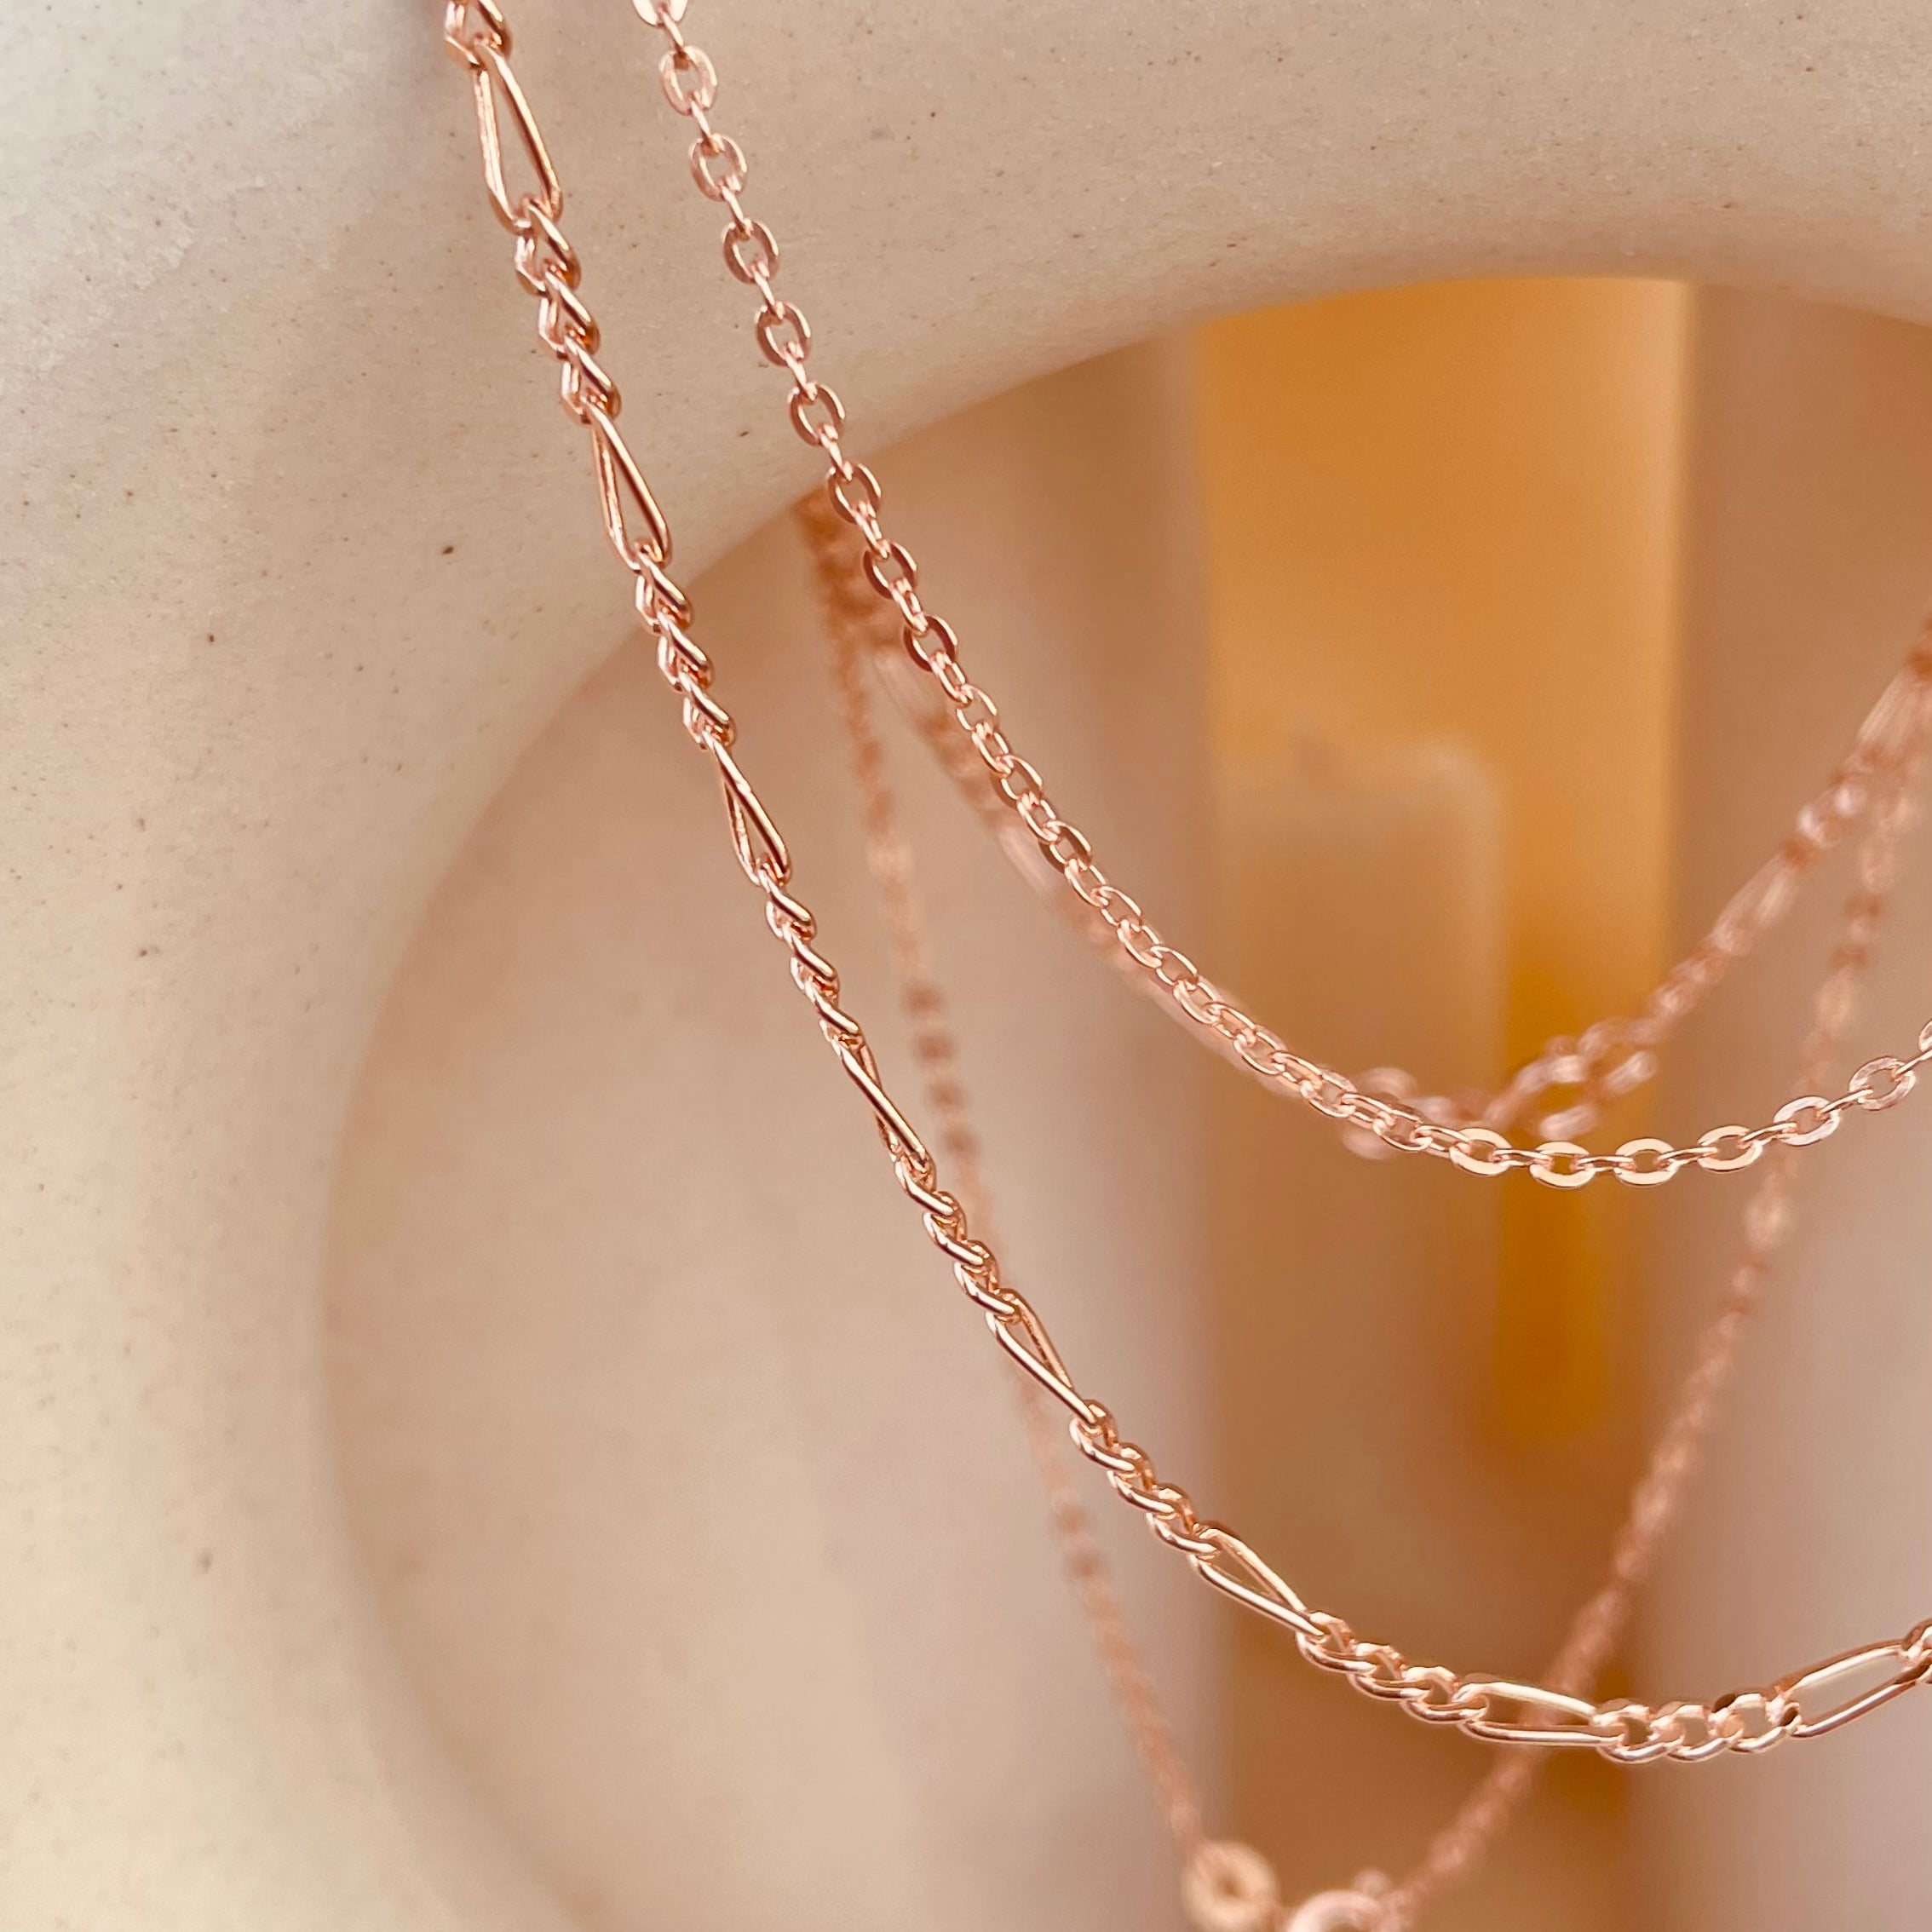 Dainty Chains Duo Necklace - Octonov 